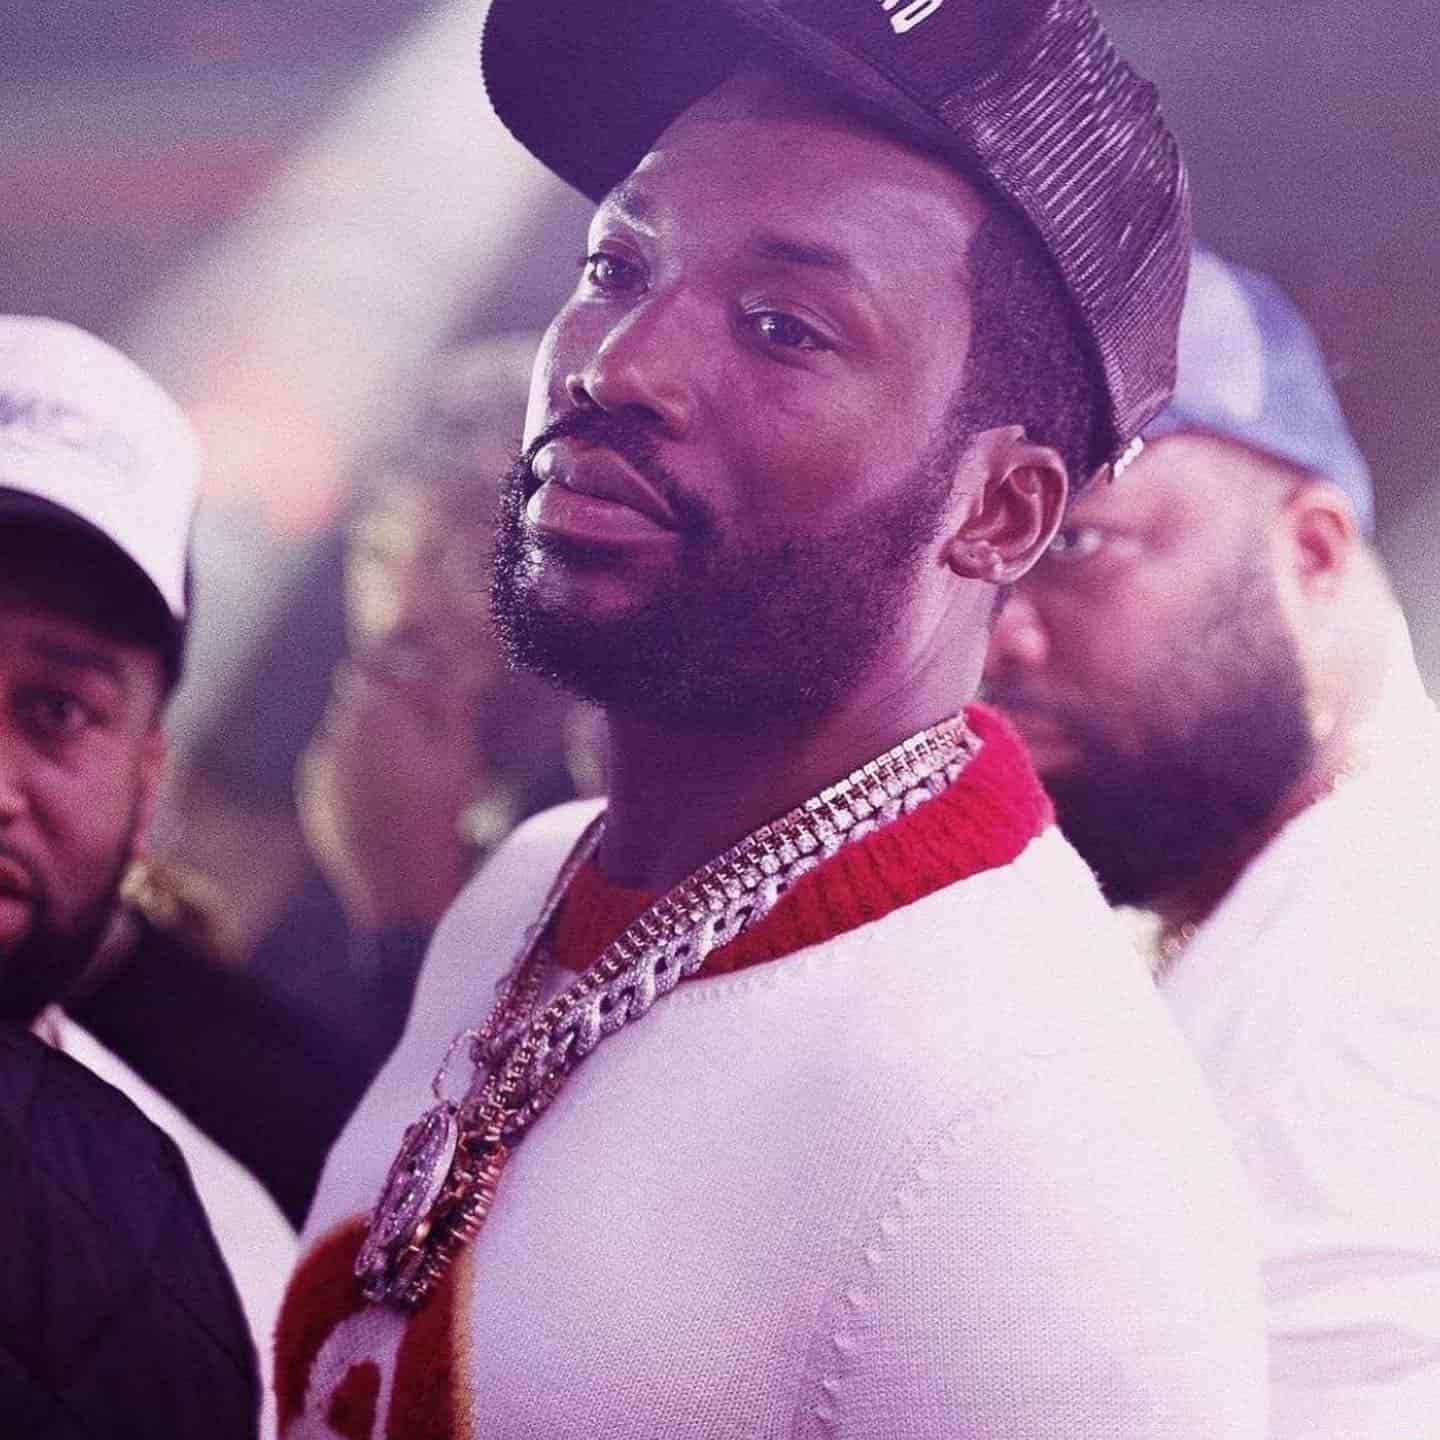 What Is Meek Mill's Net Worth? It's Not as High as You May Think